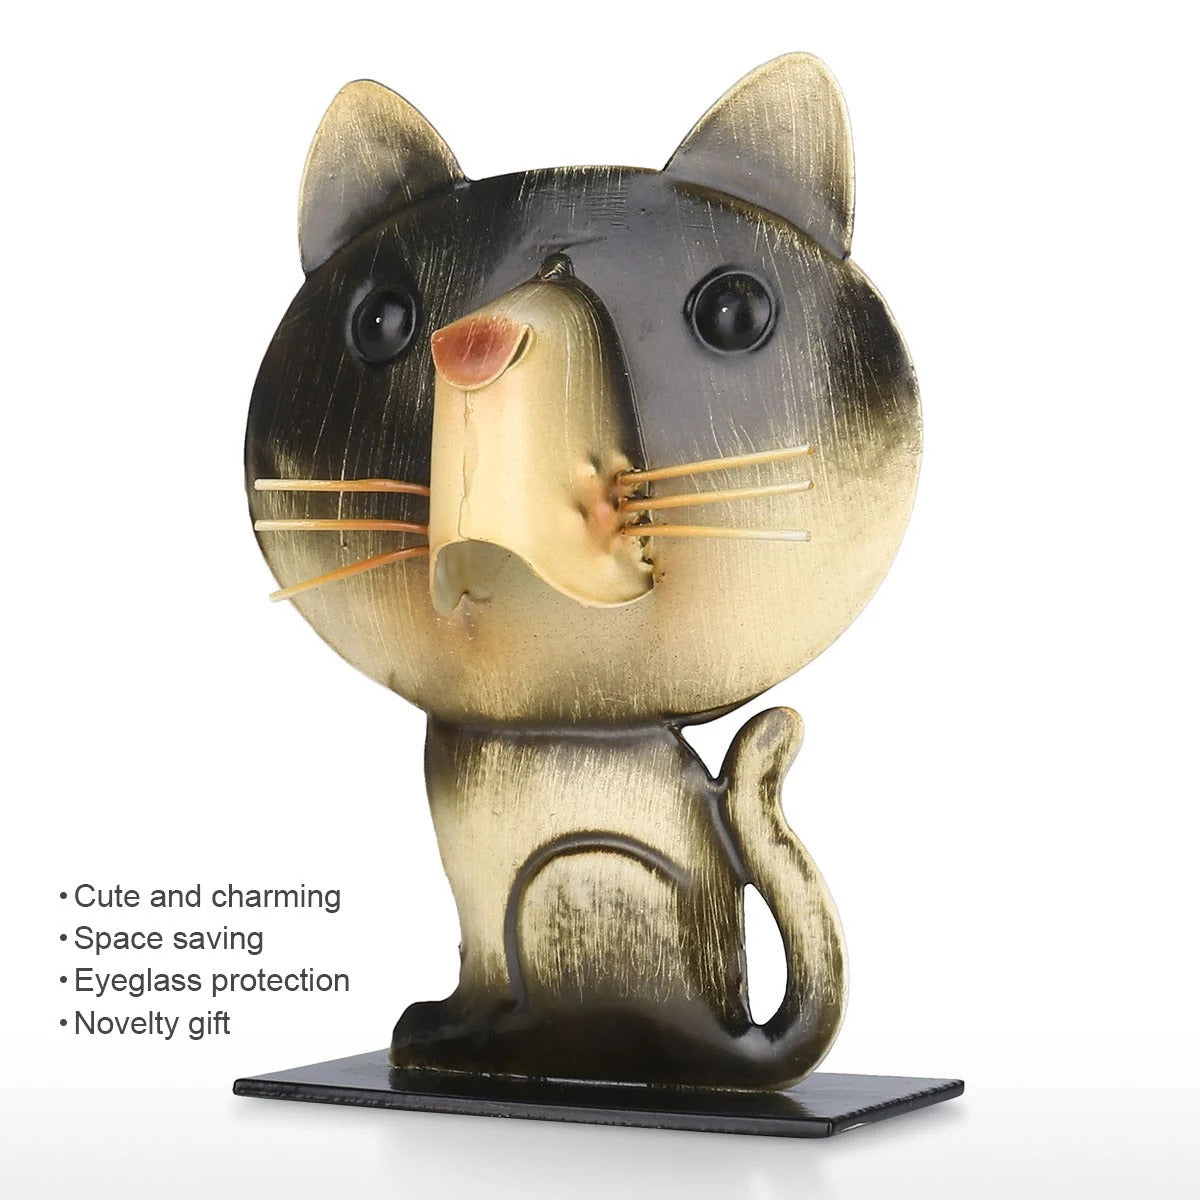 Cat Themed Gifts as Ornaments and Home Decor